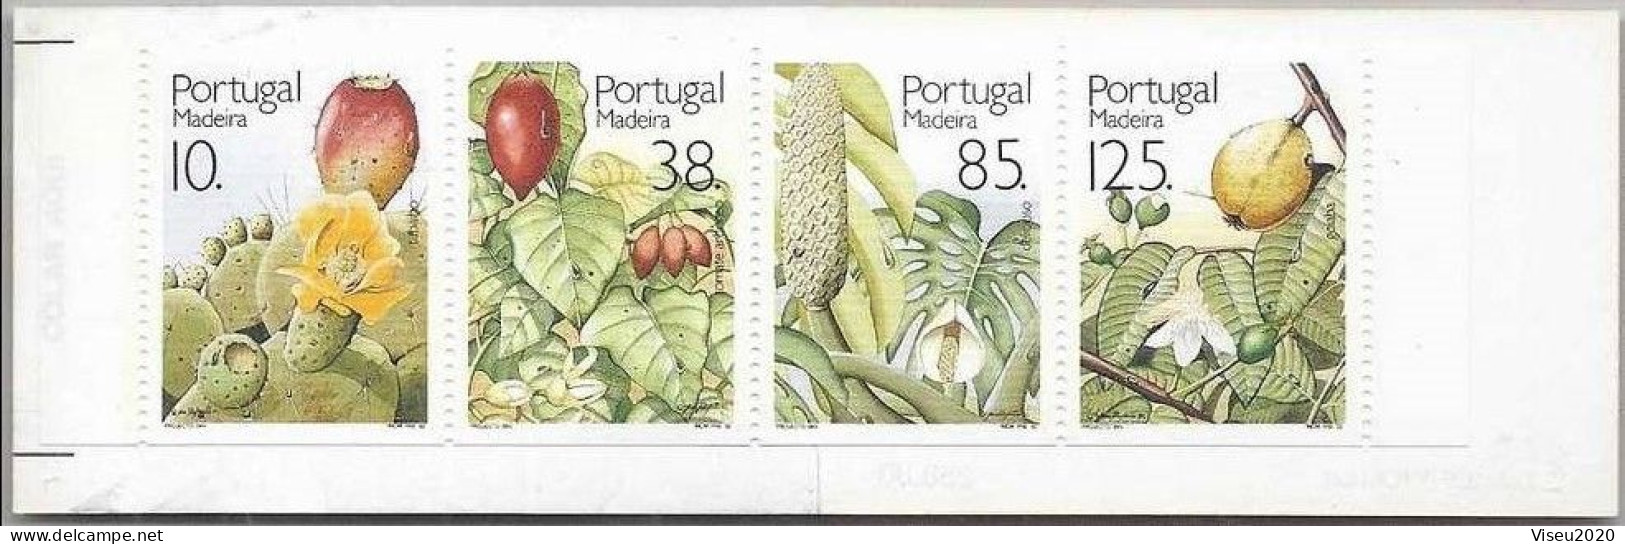 Portugal Booklet  Afinsa 83 - MADEIRA 1992 Fruits And Plants Of Subtropic Region MNH - Carnets